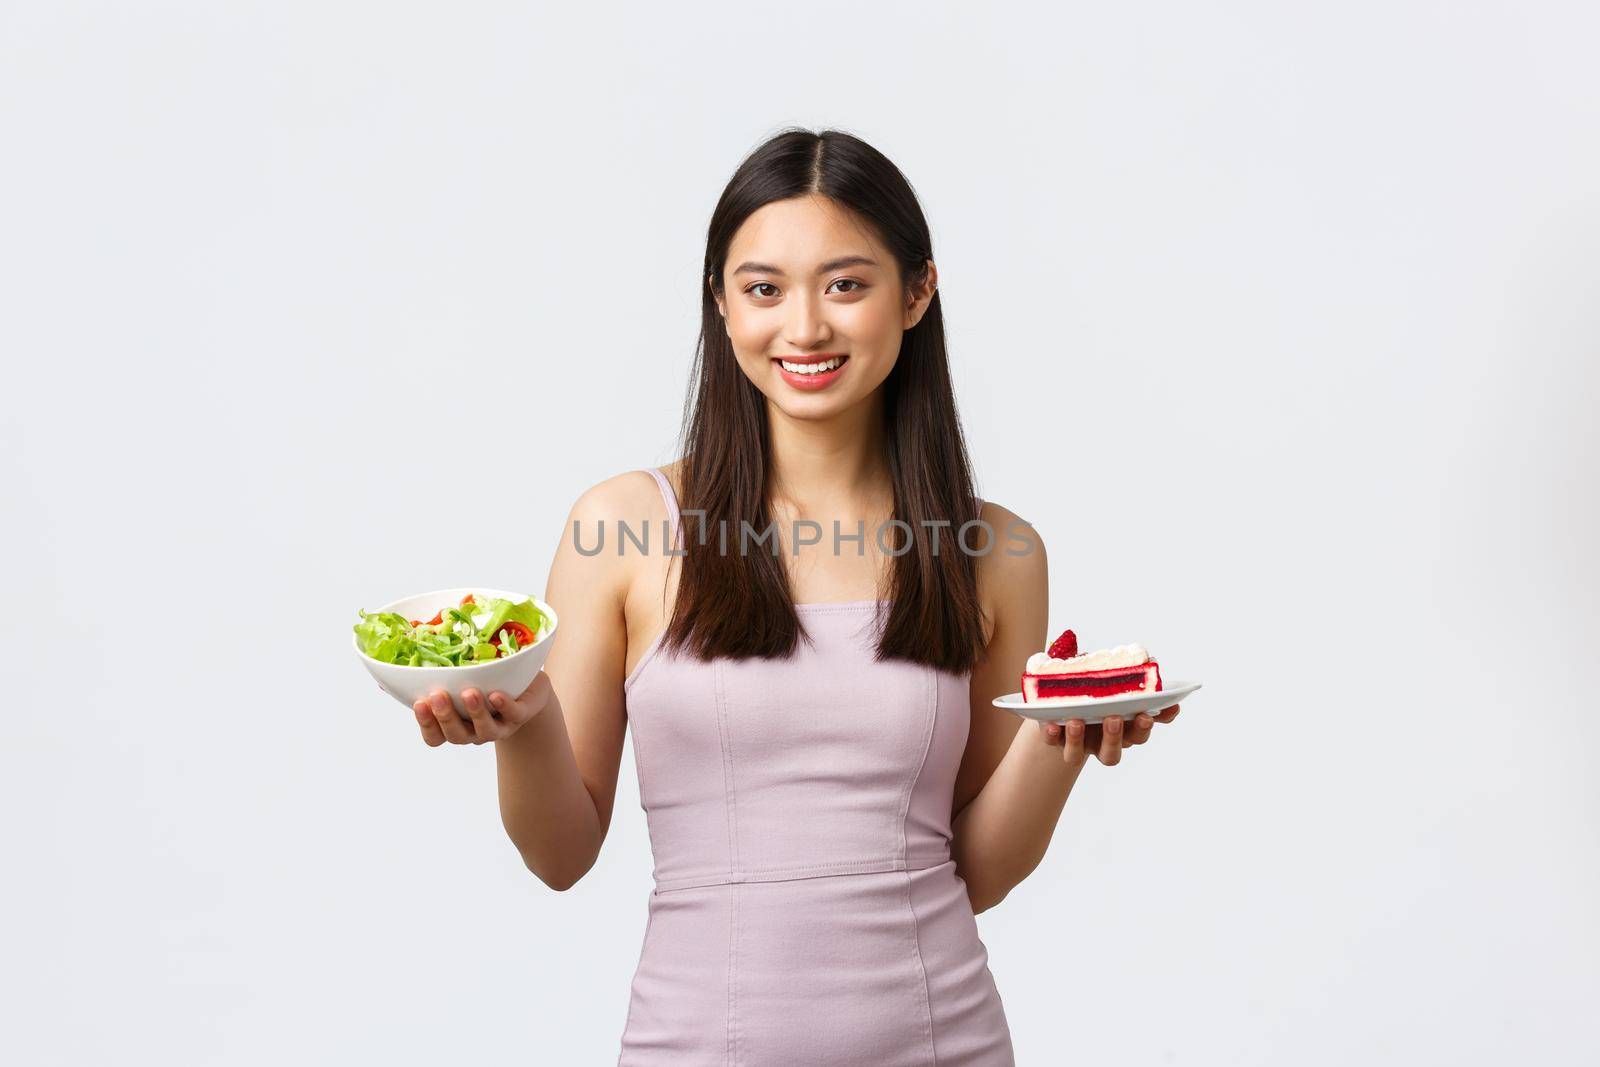 Healthy lifestyle, leisure and food concept. Cheerful beautiful asian girl in dress showing bowl with salad and piece of cake, smiling as give advice on nutrition diet, standing white background.